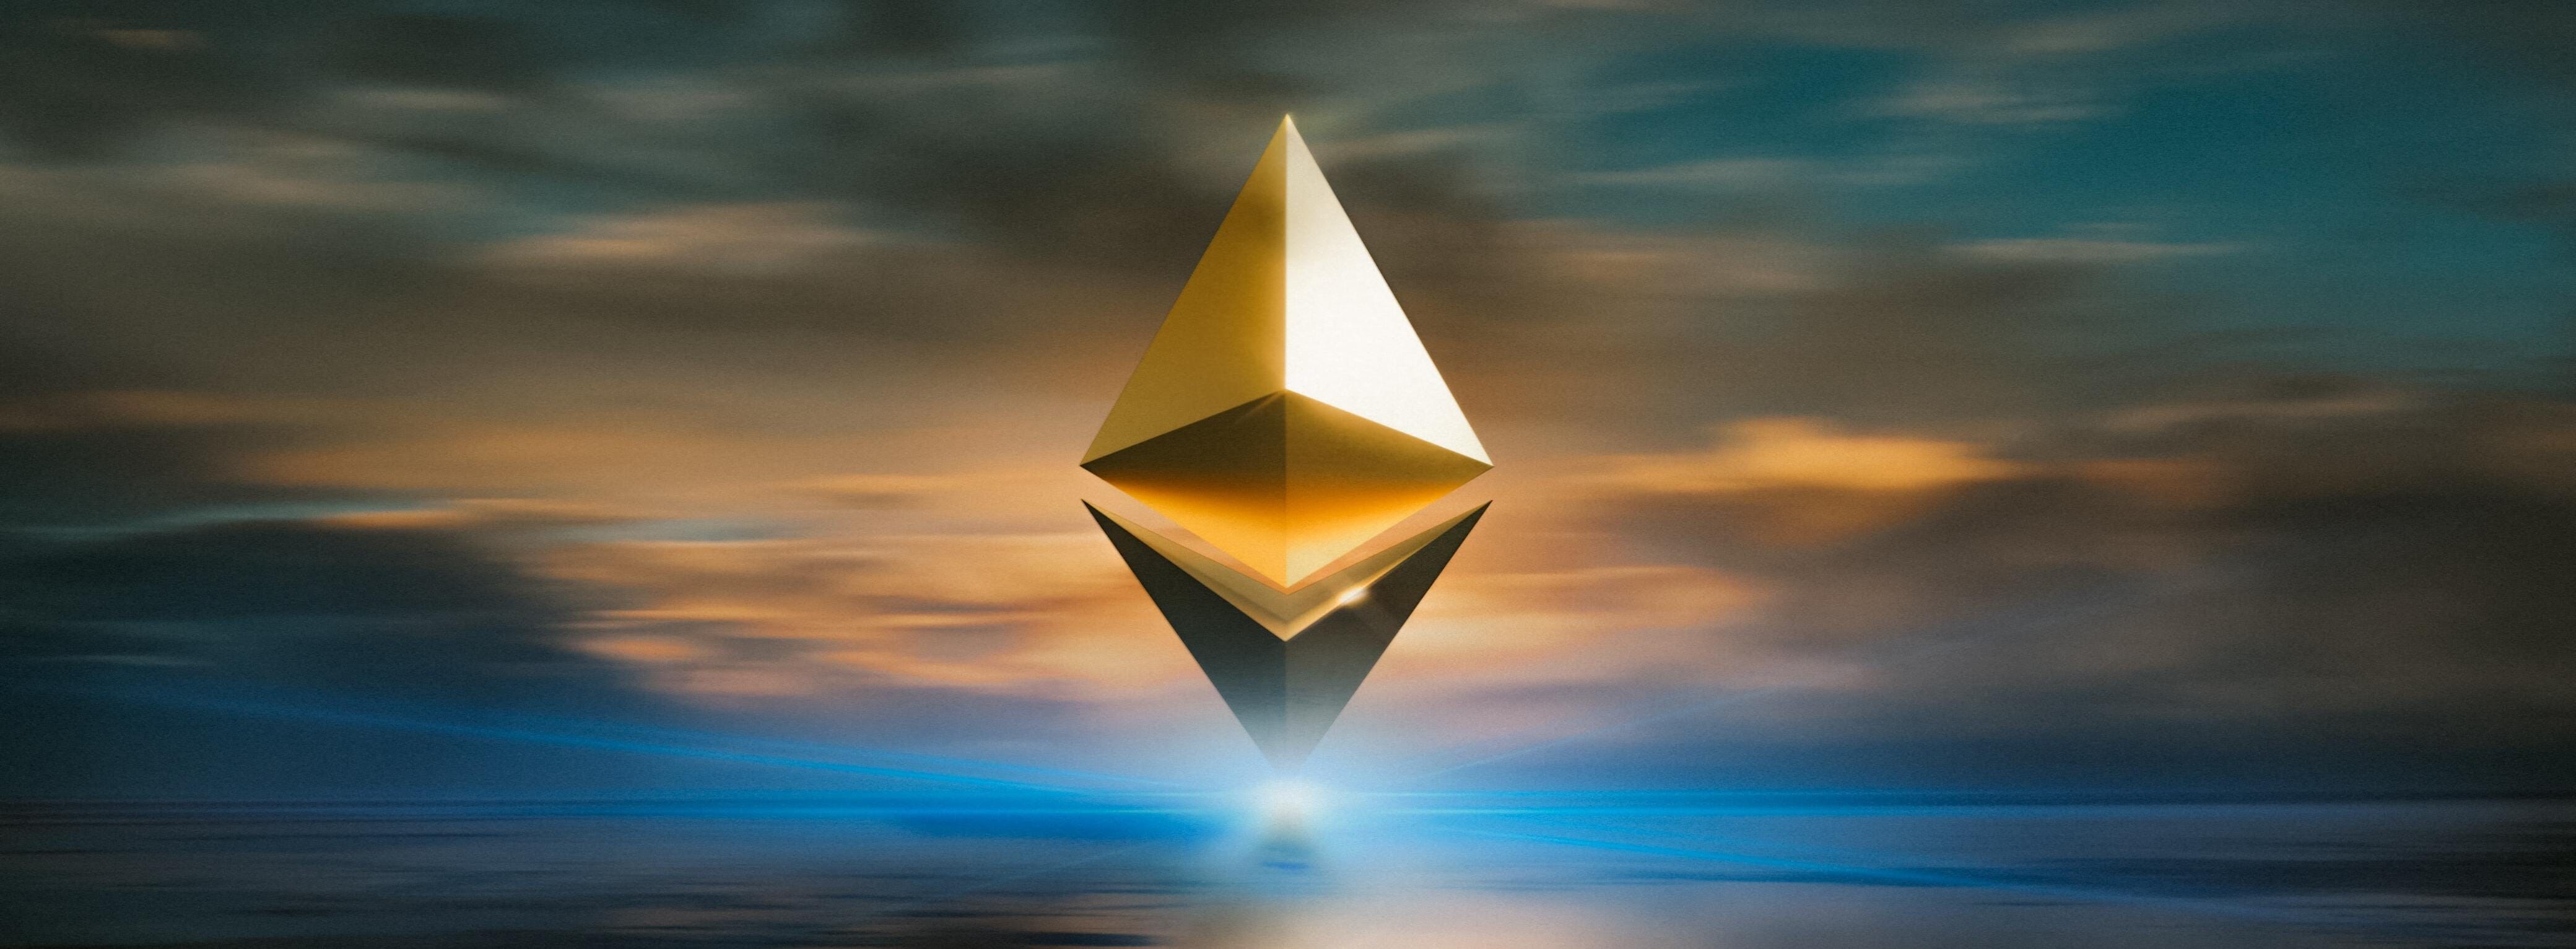 Will ethereum ever overtake bitcoin